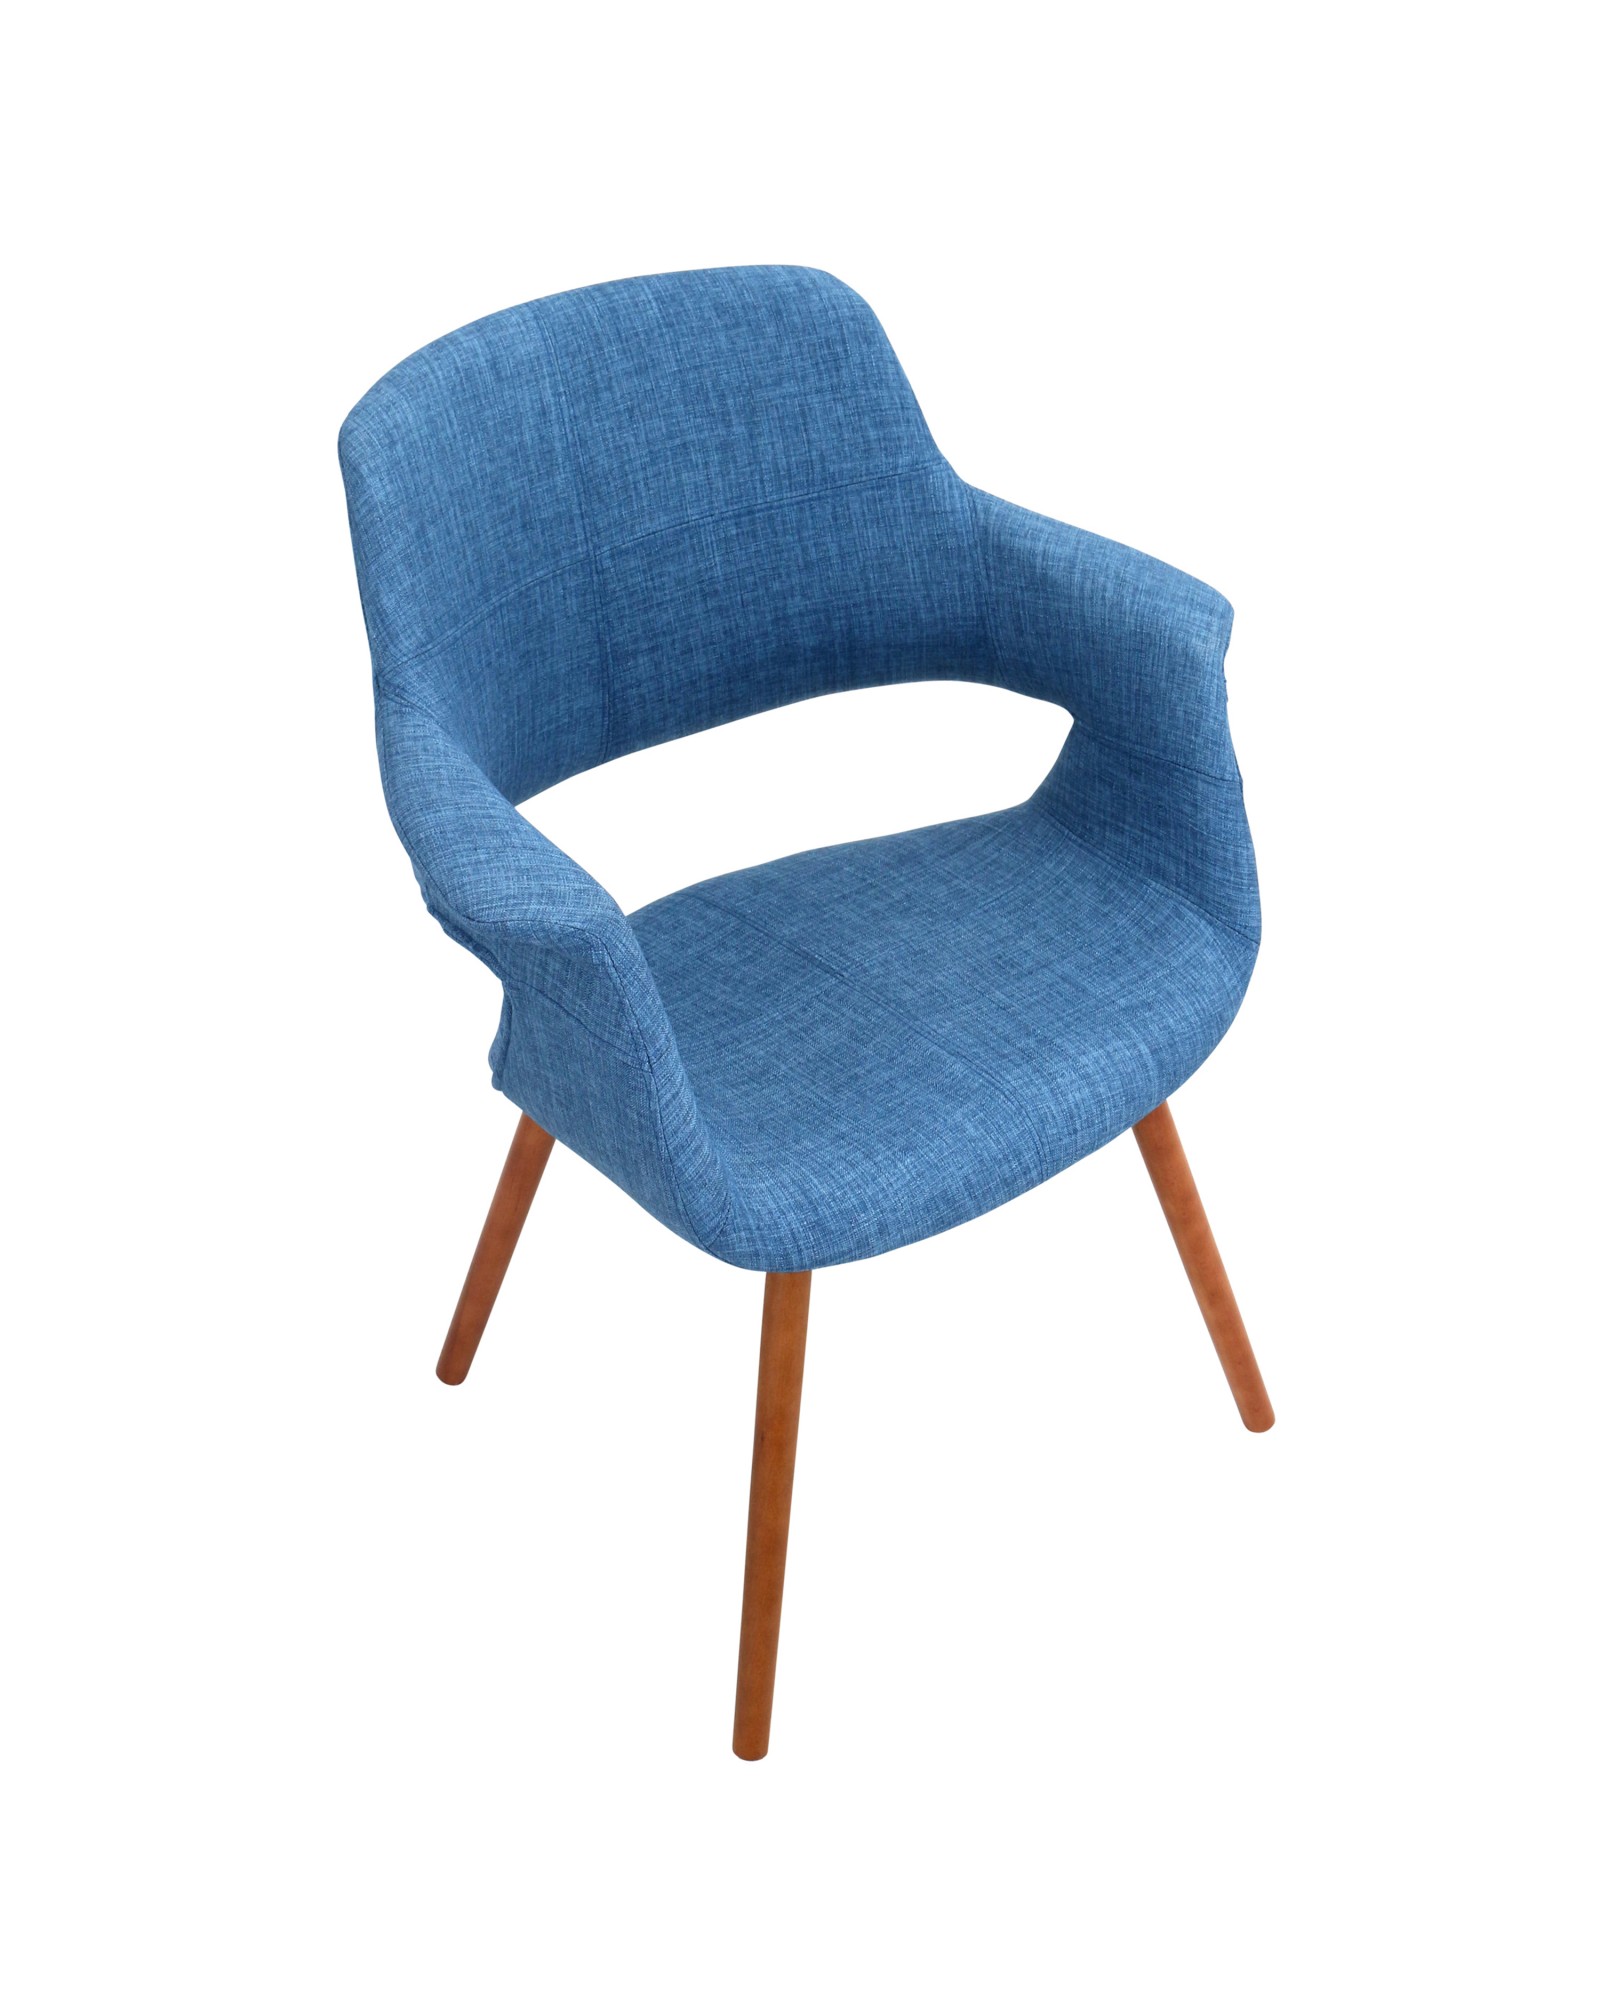 Vintage Flair Mid-Century Modern Chair in Walnut and Blue